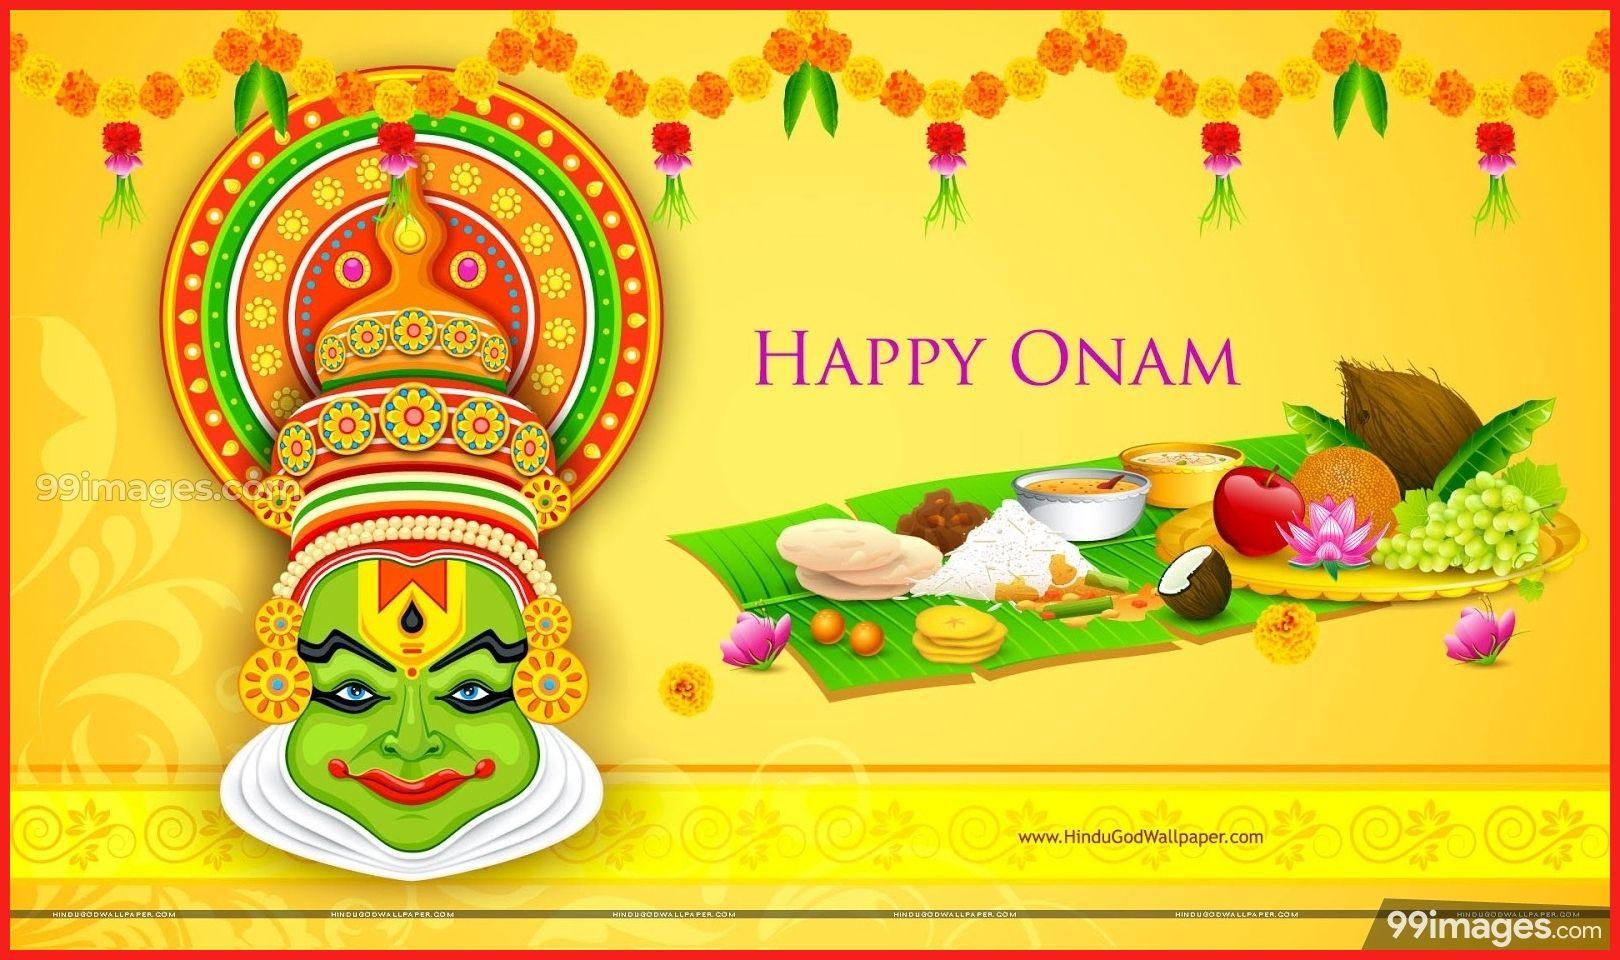 1080p Onam HD Wallpapers 1920x1080 Onam Images Download